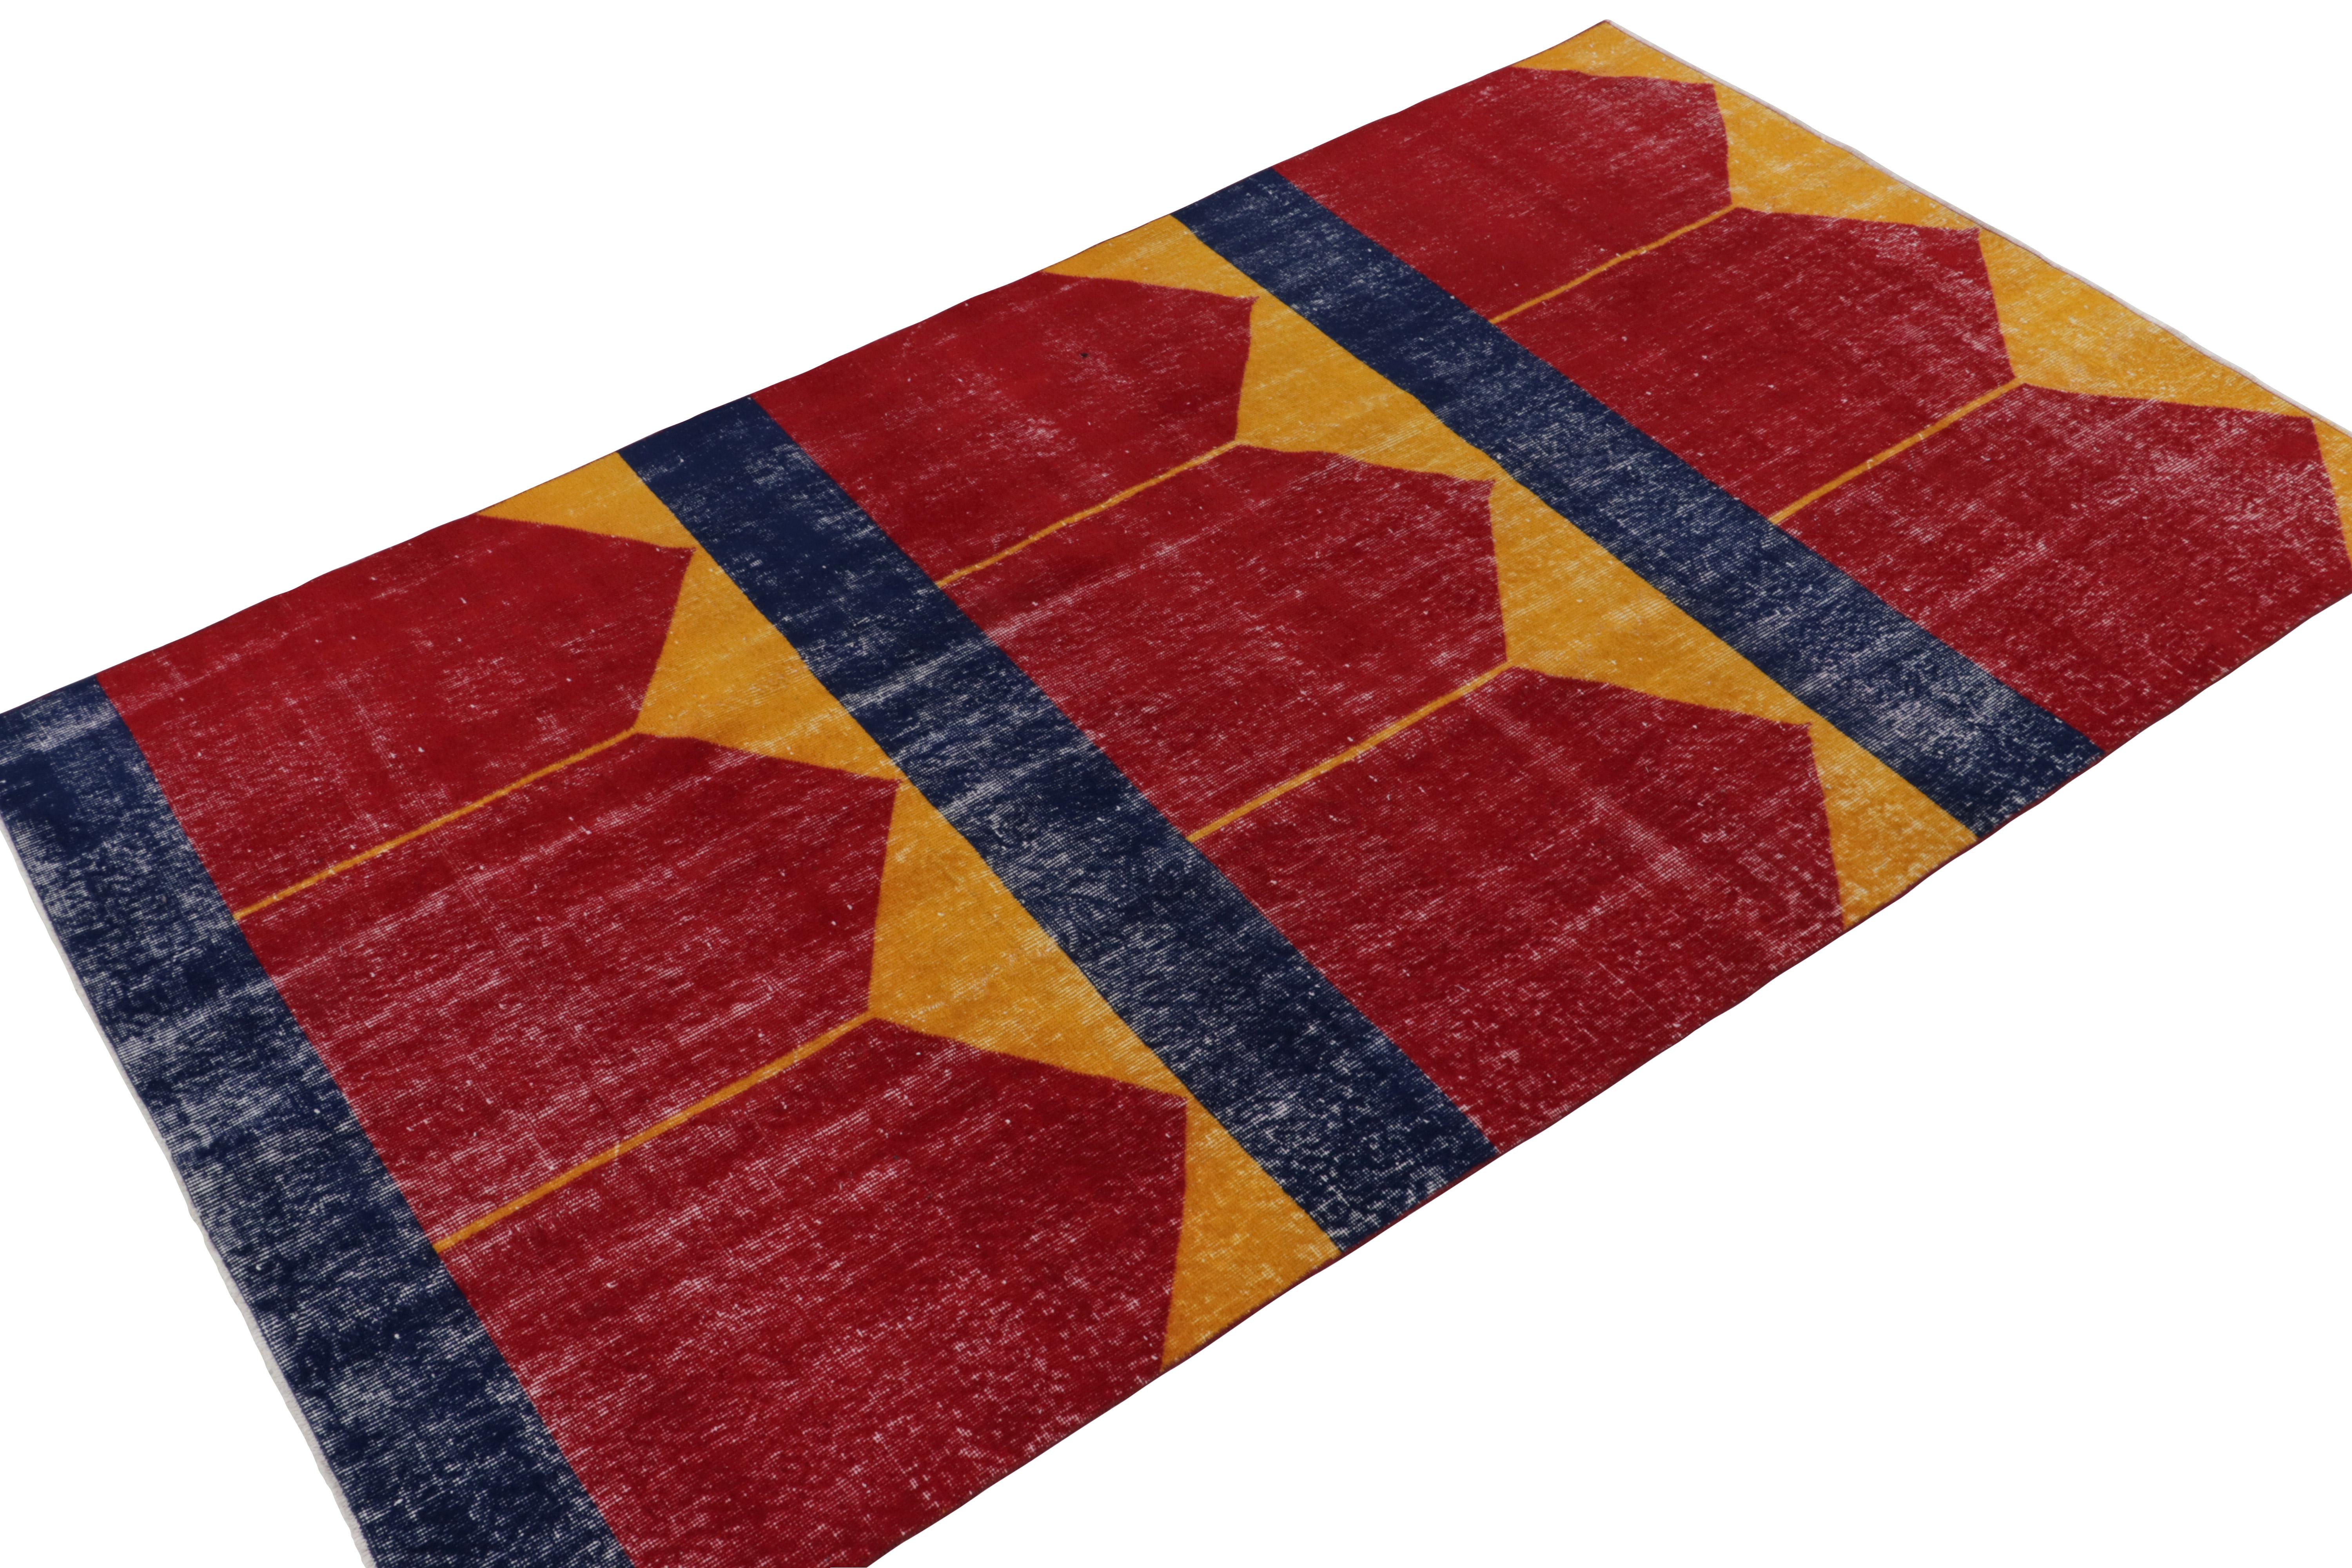 Art Deco 1960s Vintage Turkish Rug in Red, Blue, Gold Geometric Pattern by Rug & Kilim For Sale